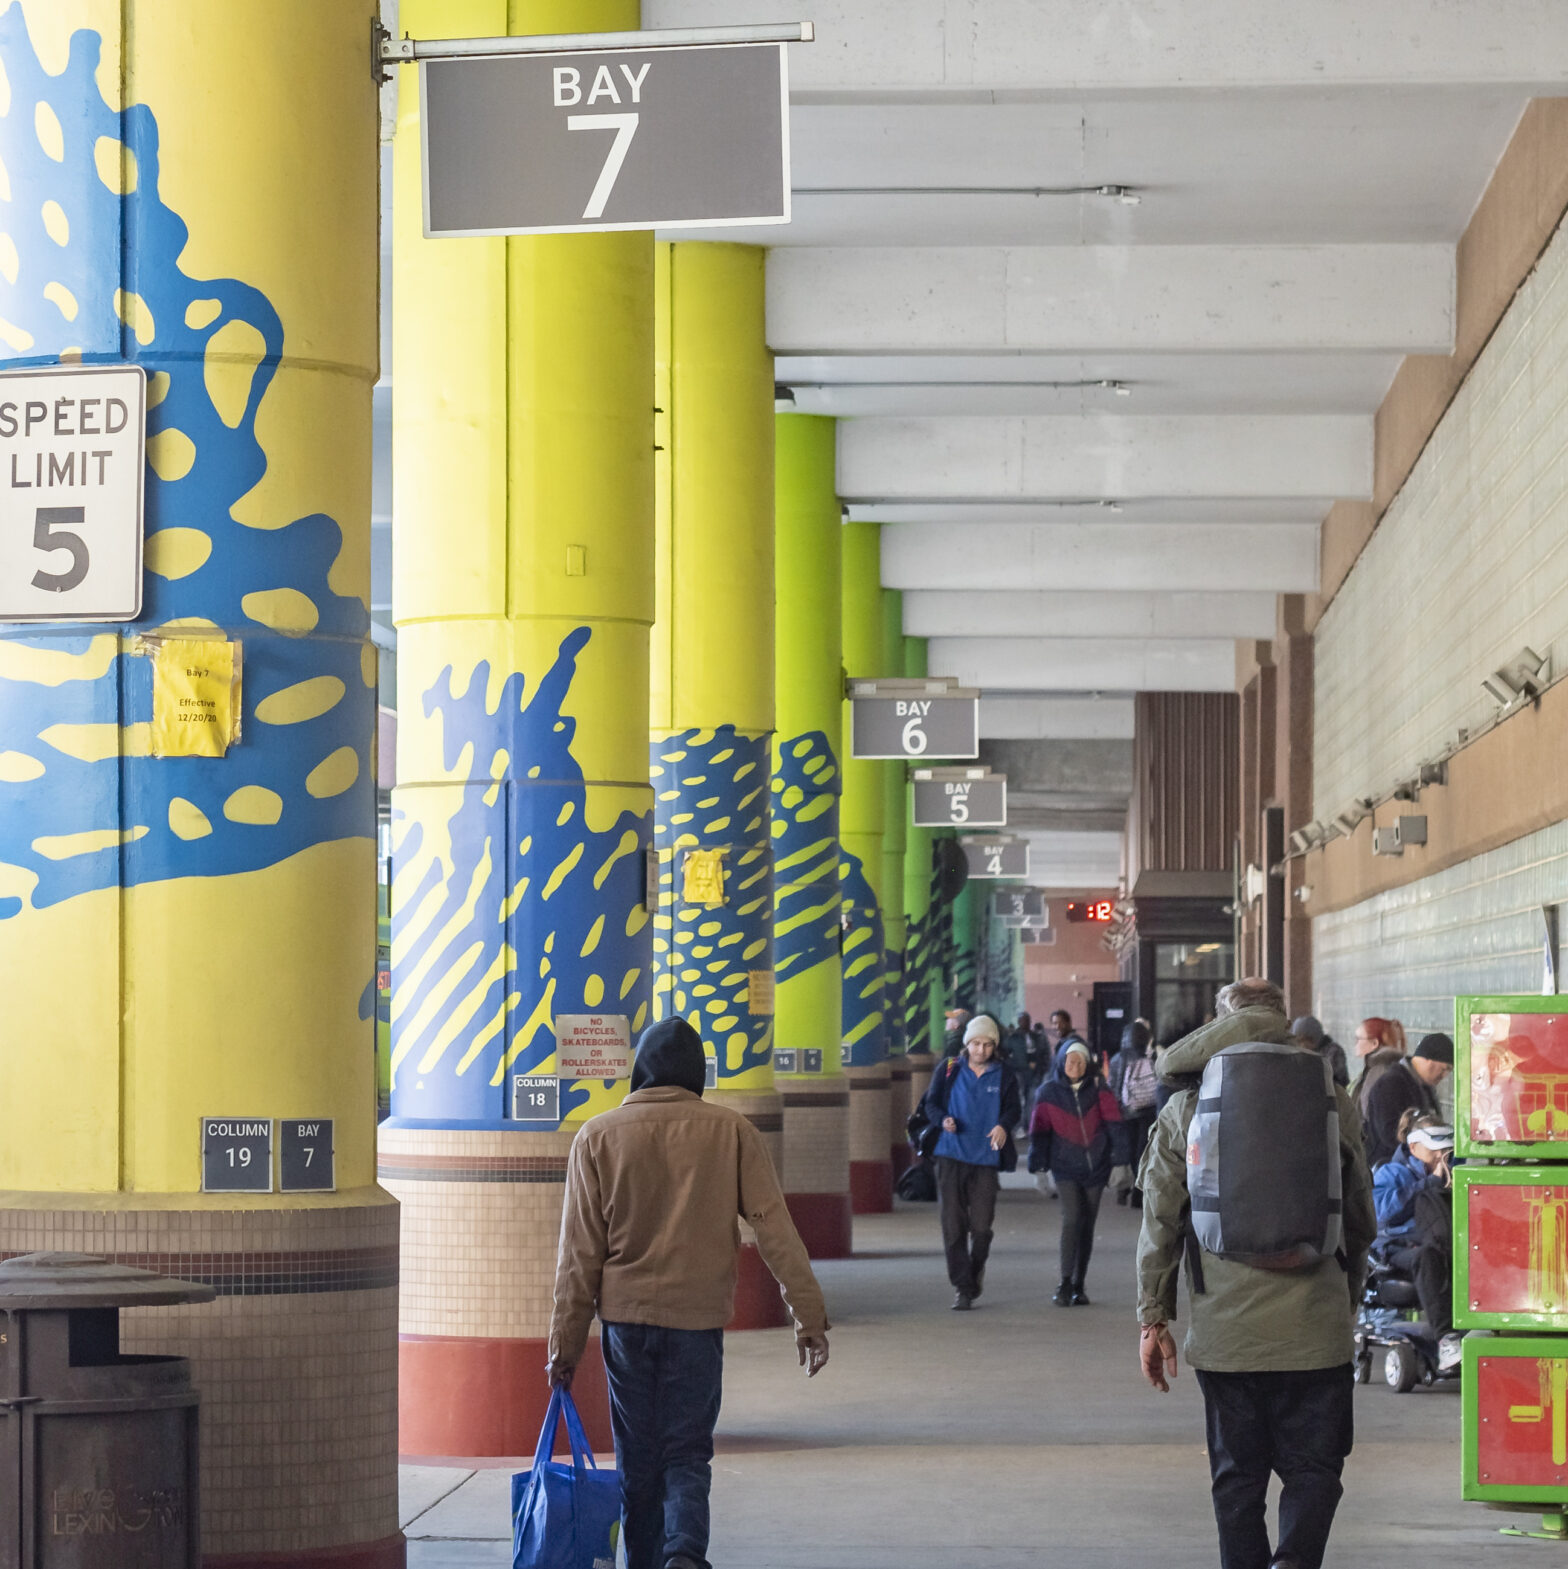 People walking through a brightly colored transit center with yellow and green pillars, marked with bay numbers, and signage indicating Bay 7. The area is covered, with various signs and a 5 mph speed limit sign visible. Passengers are carrying bags and wearing jackets, indicating a cold day.